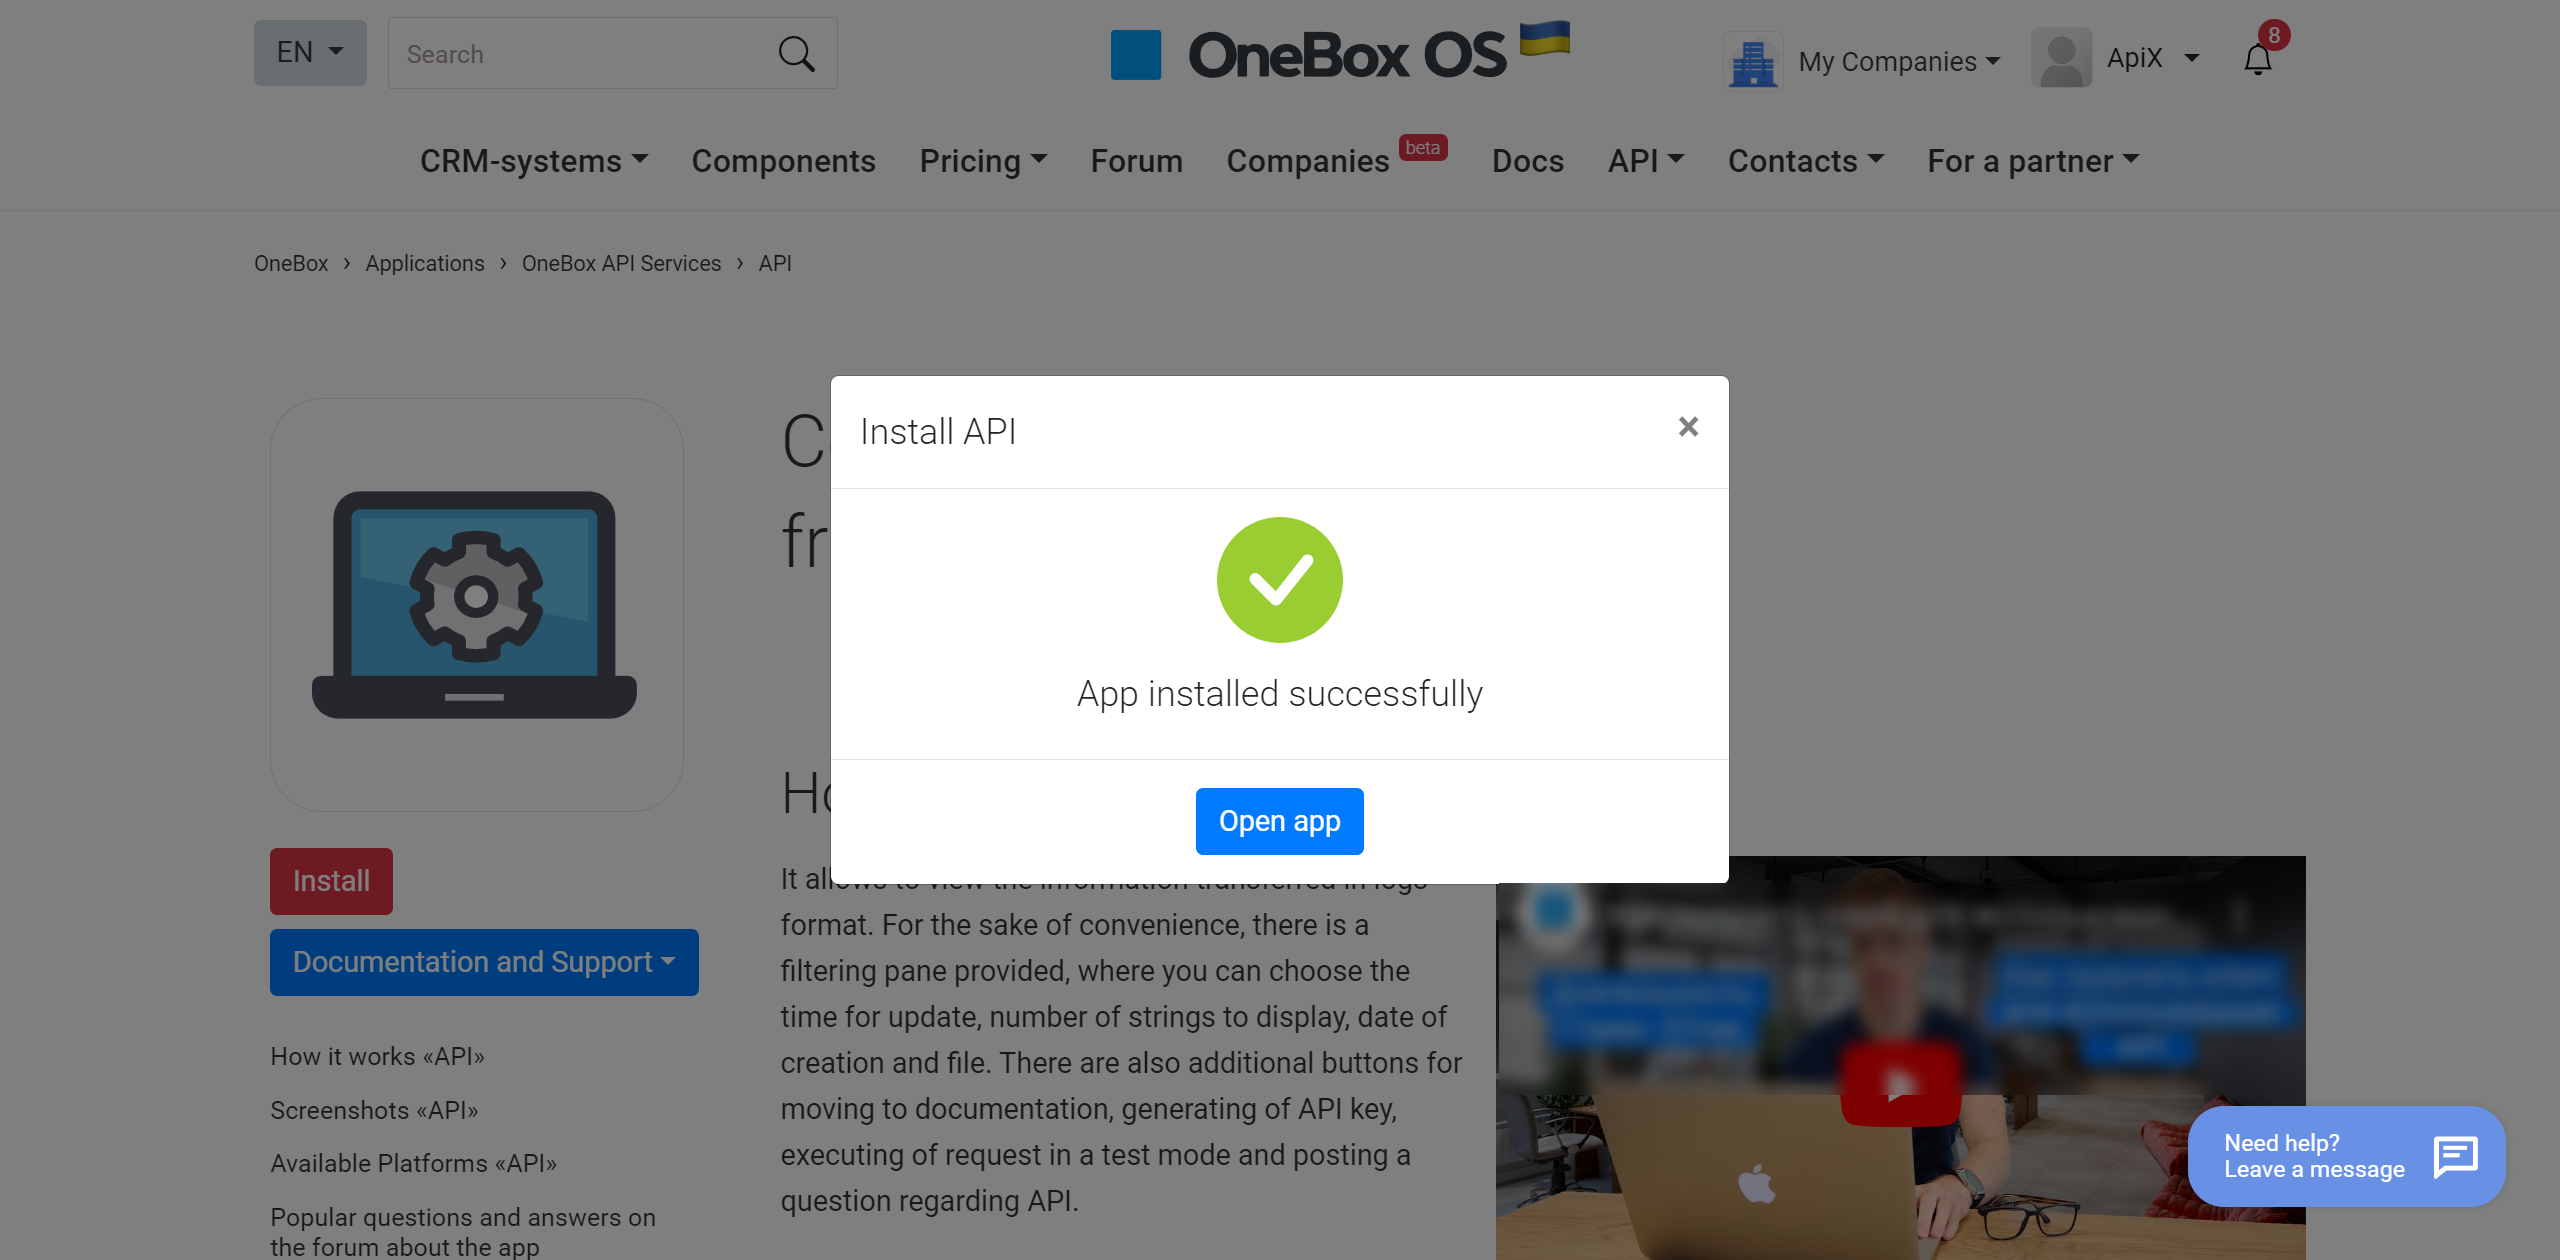 How to setup OneBox Change Order / Create Order | Successful installation of API